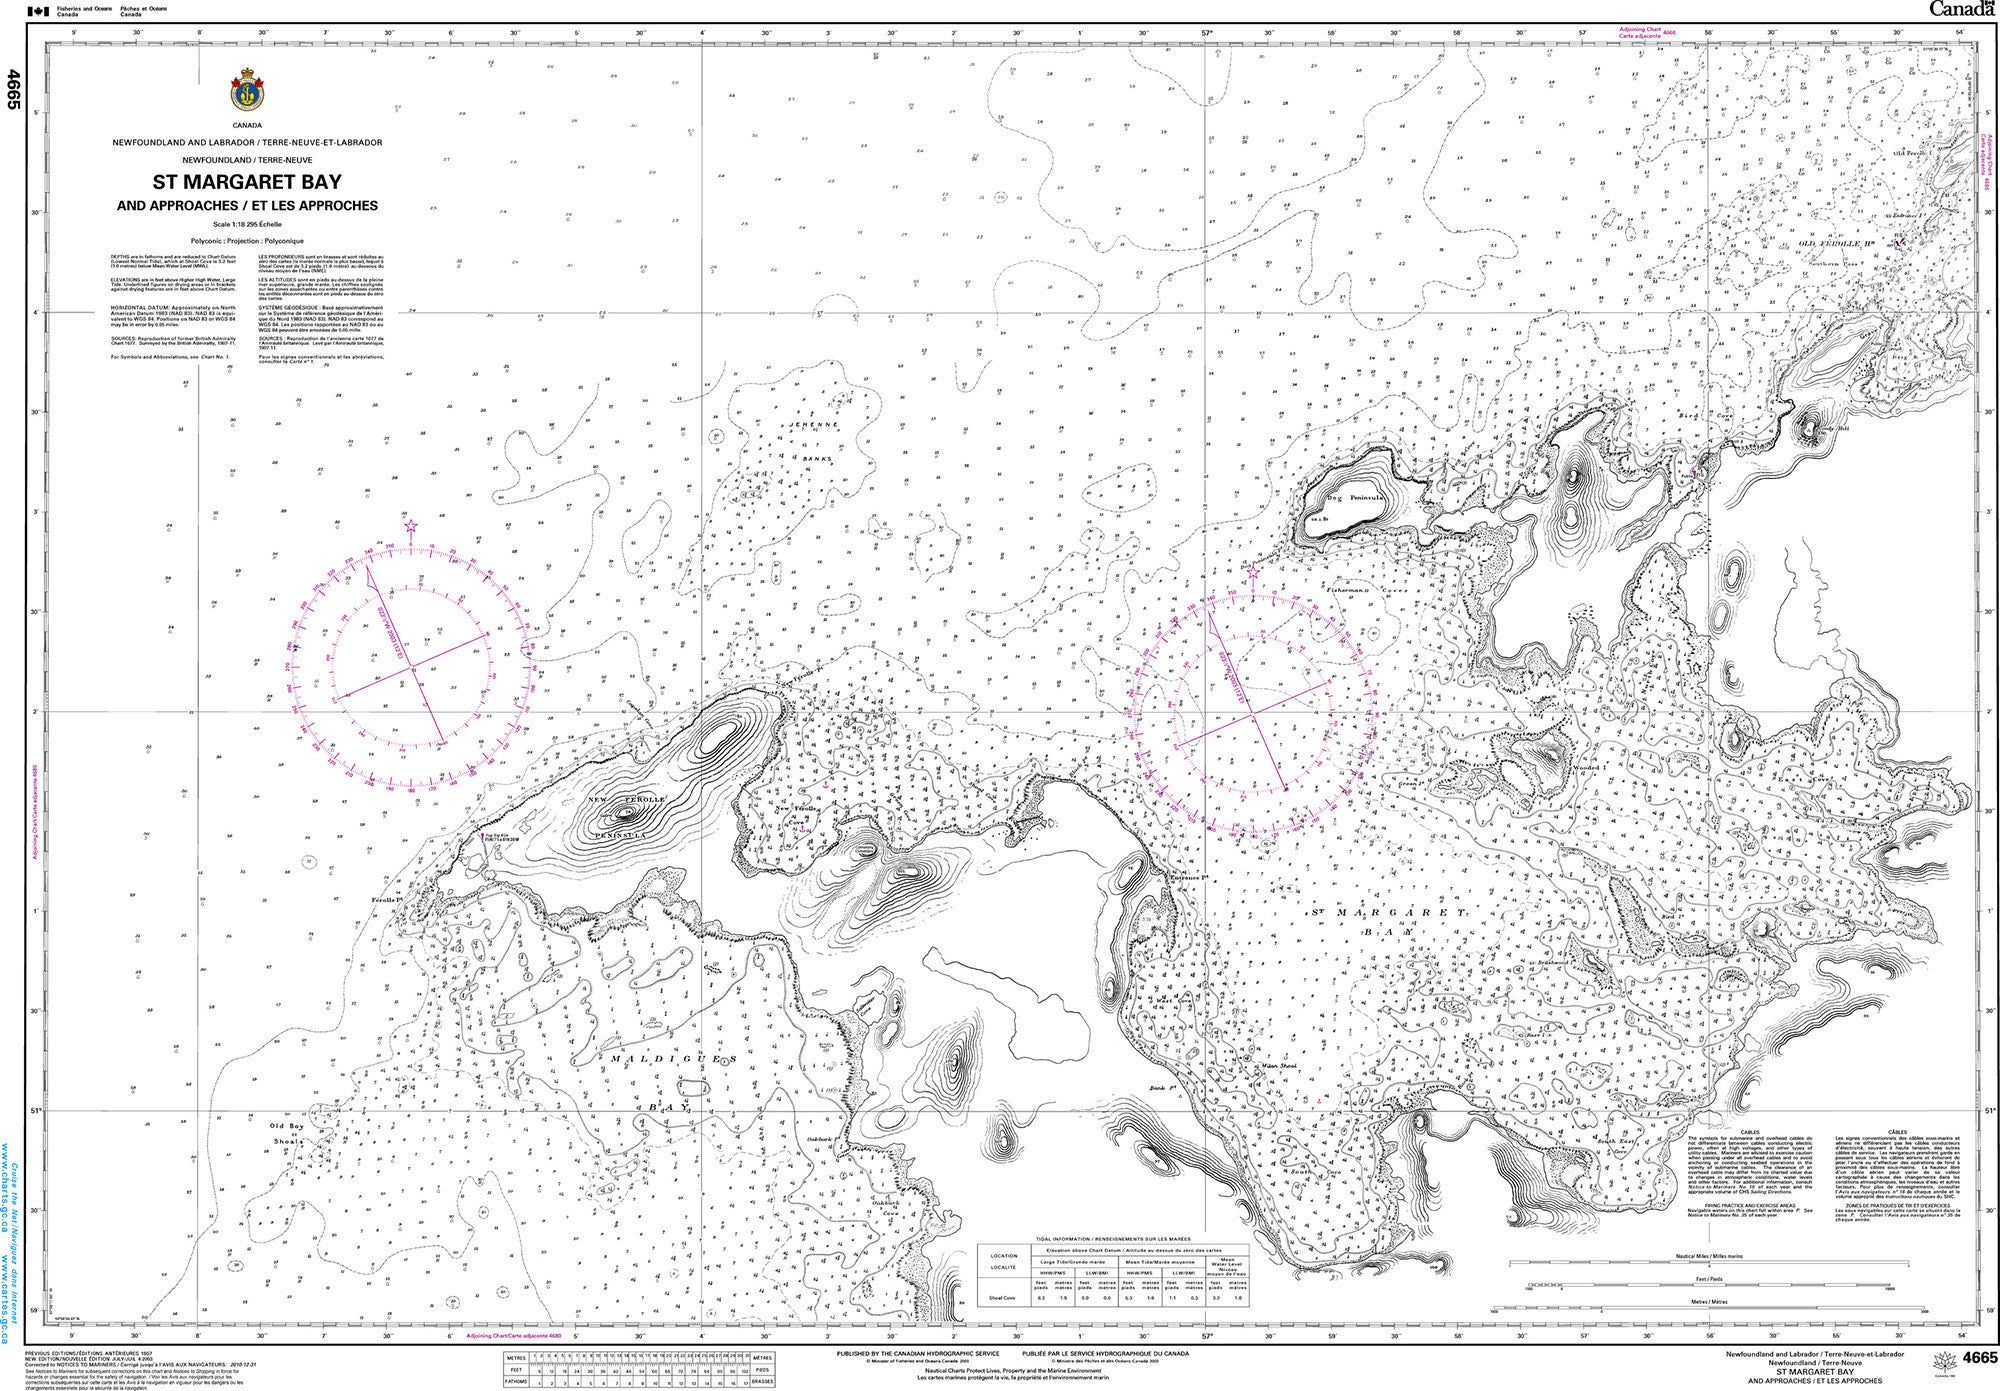 Canadian Hydrographic Service Nautical Chart CHS4665: St. Margaret Bay and Approaches/et les approches